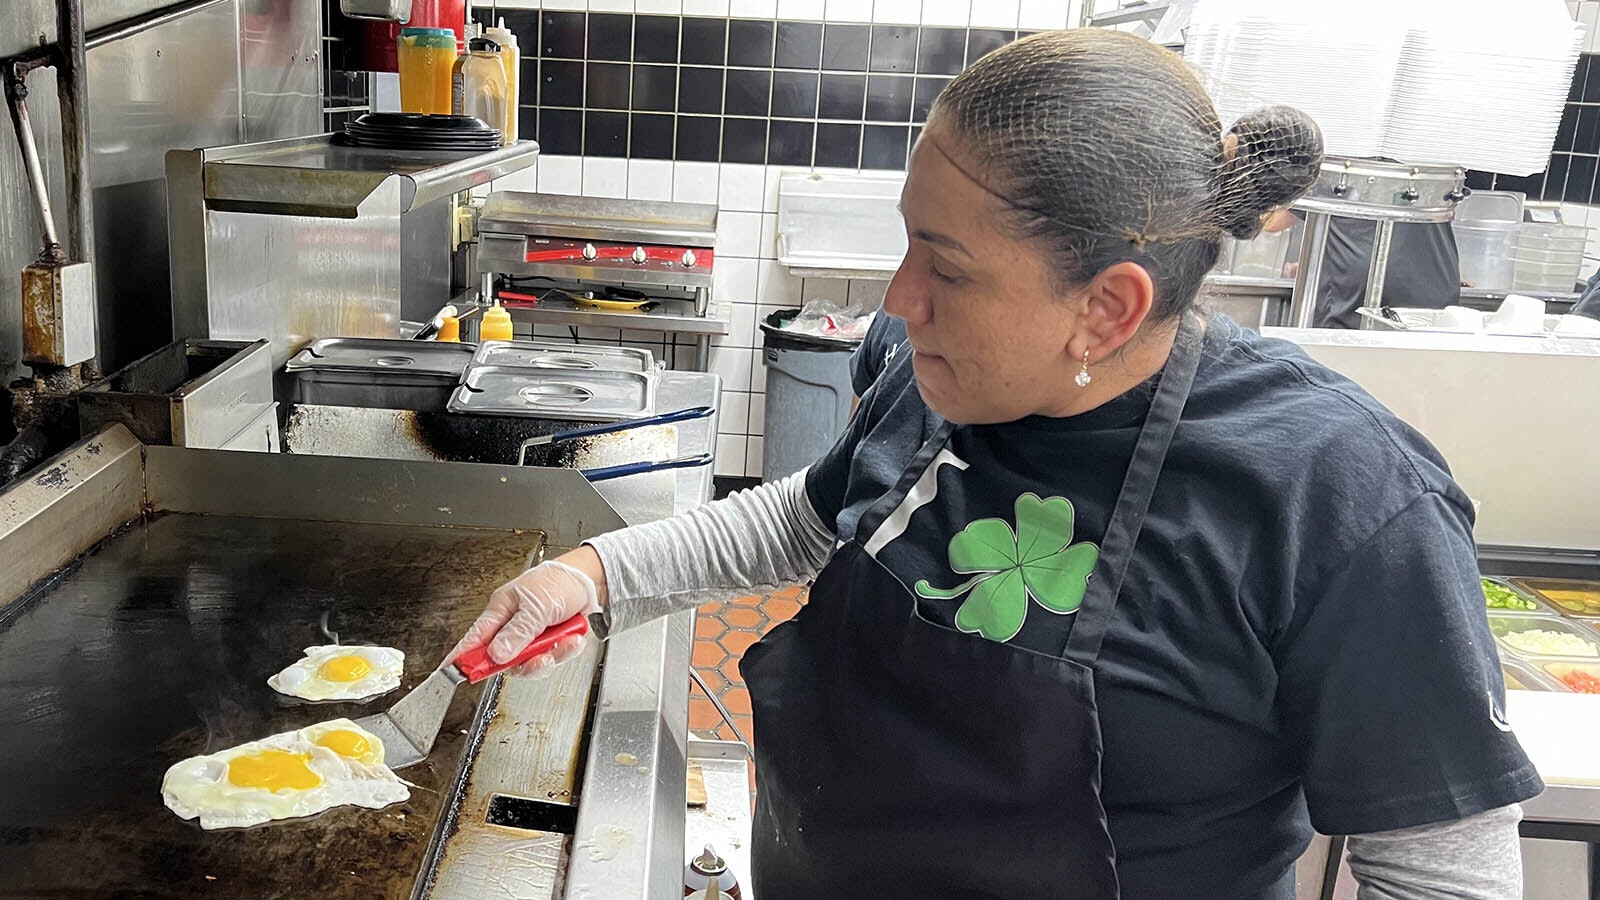 Famous for its Elvis theme and huge breakfasts, the R&B Breakfast Club on Lincolnway in Cheyenne is a favorite local spot. And Veronica Cervantes is a true pro with the eggs.